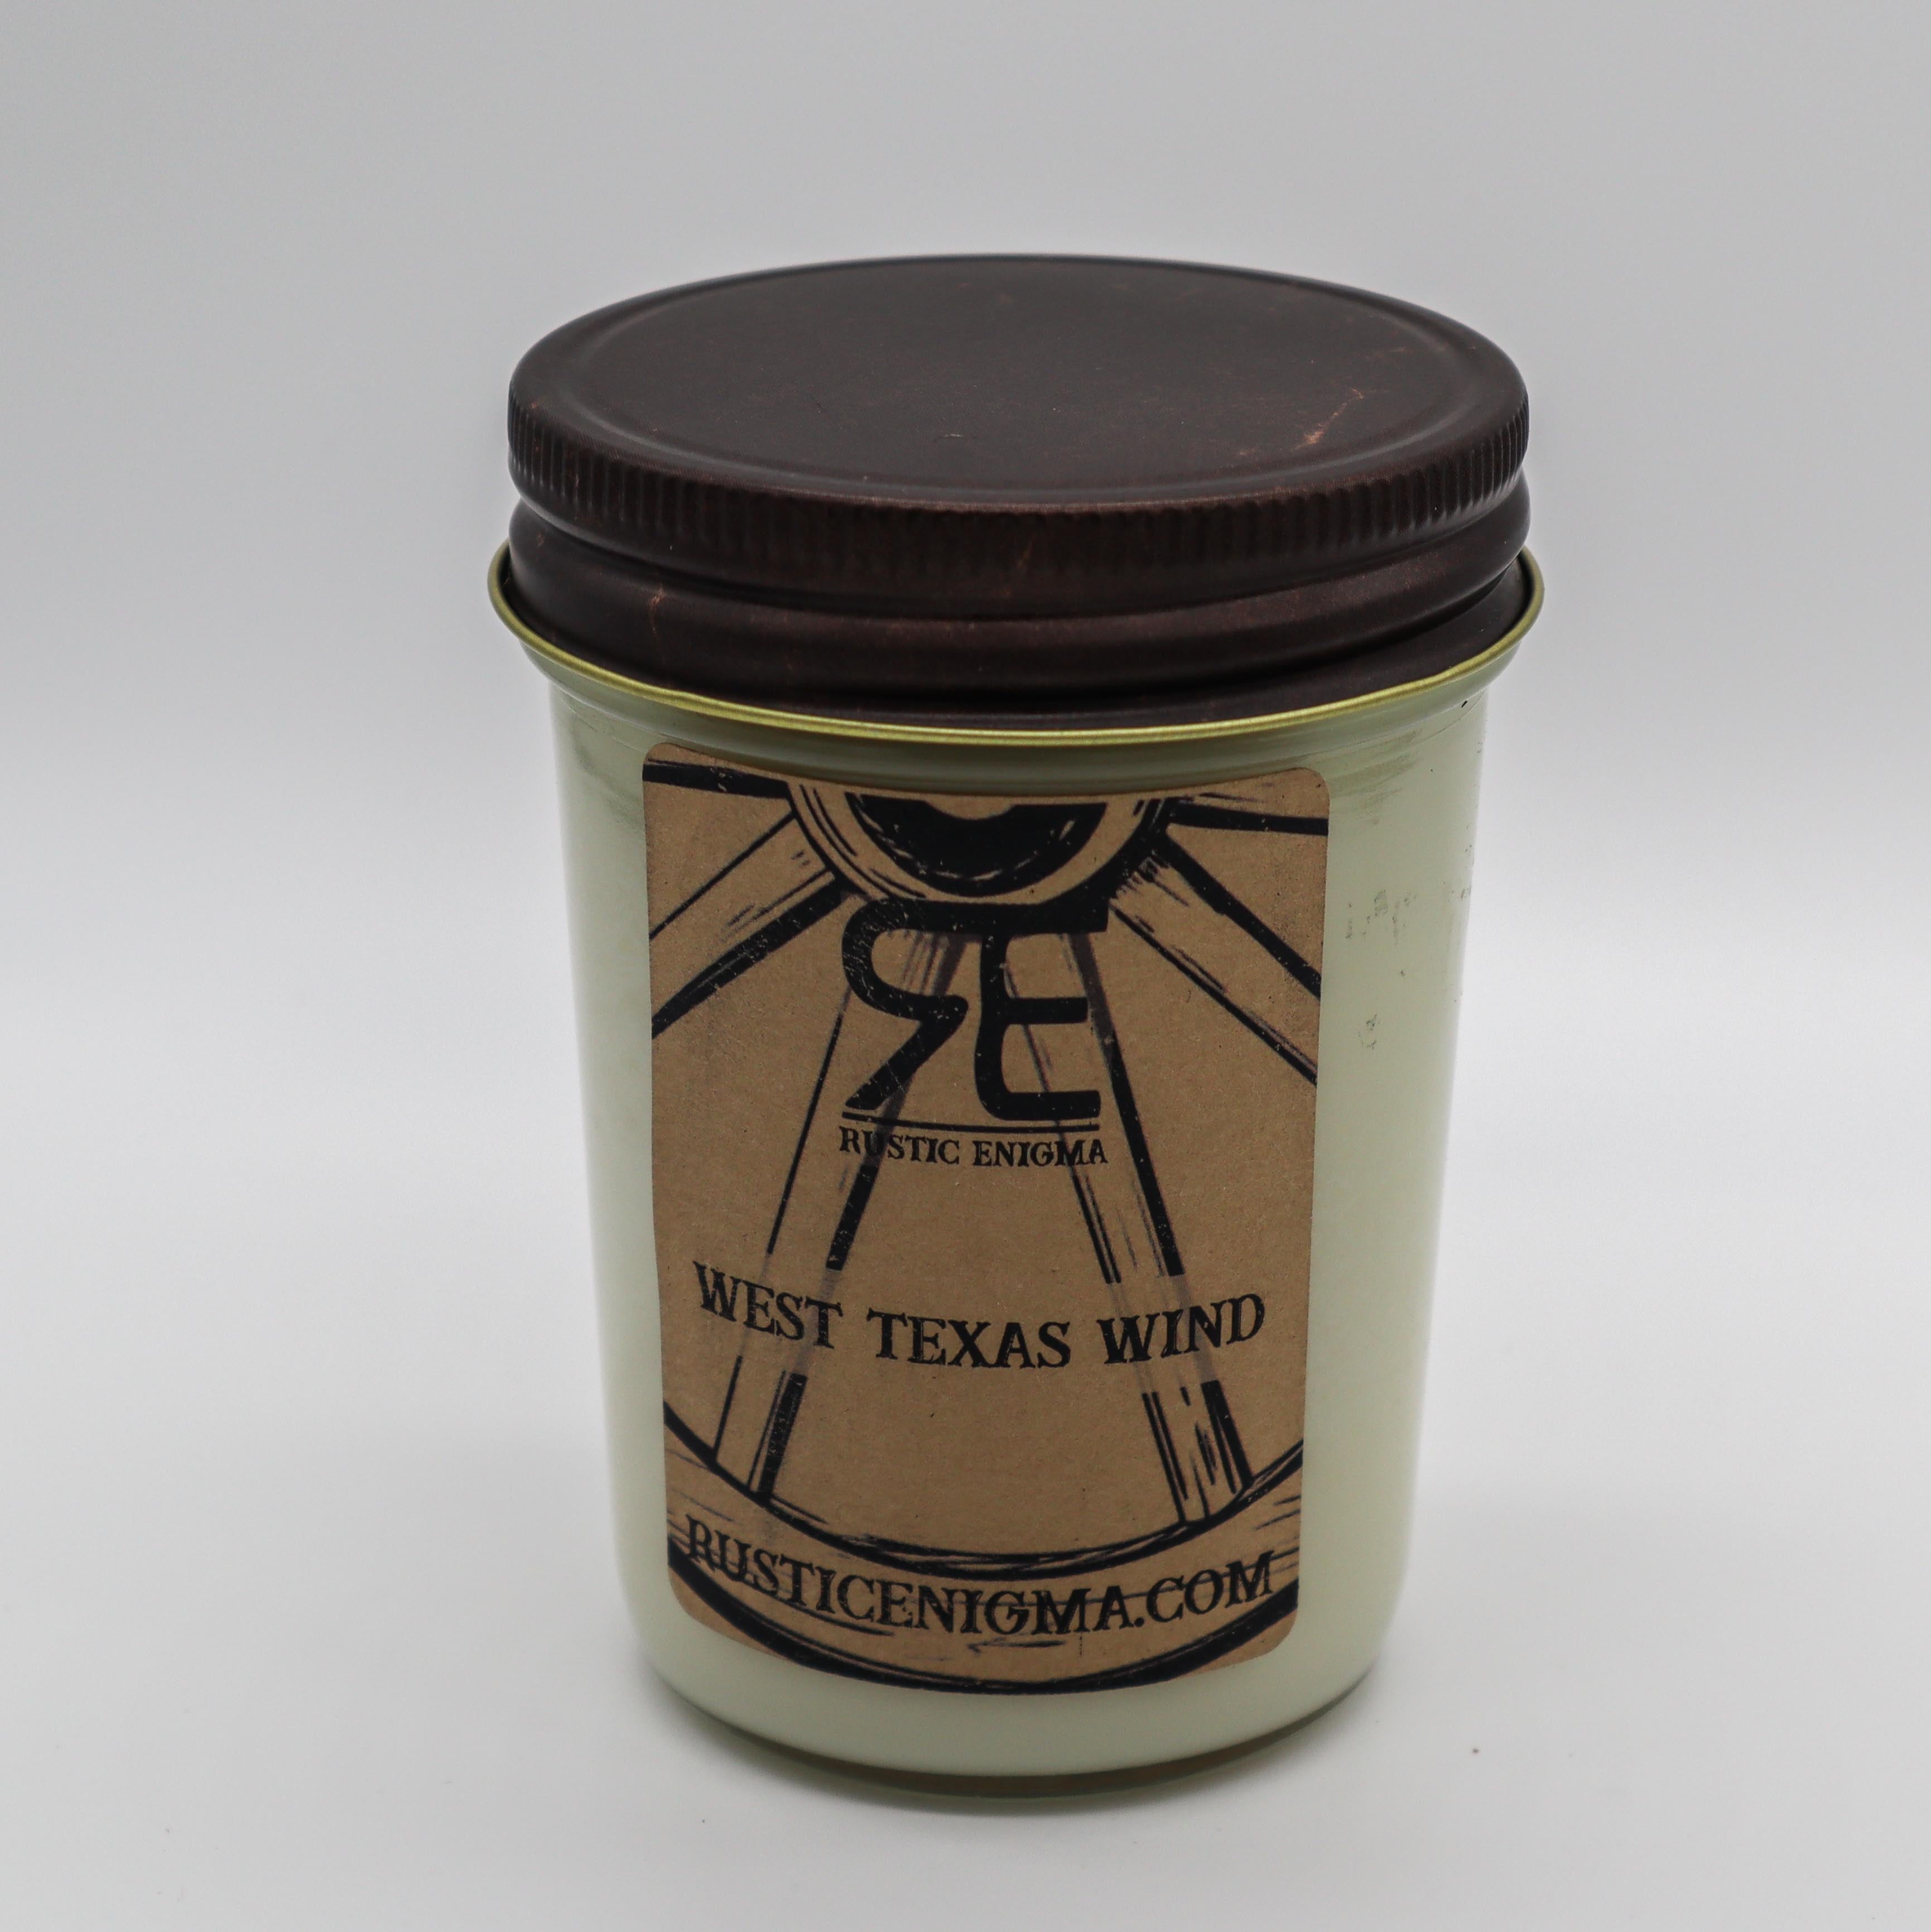 West Texas Wind 8 oz Candle